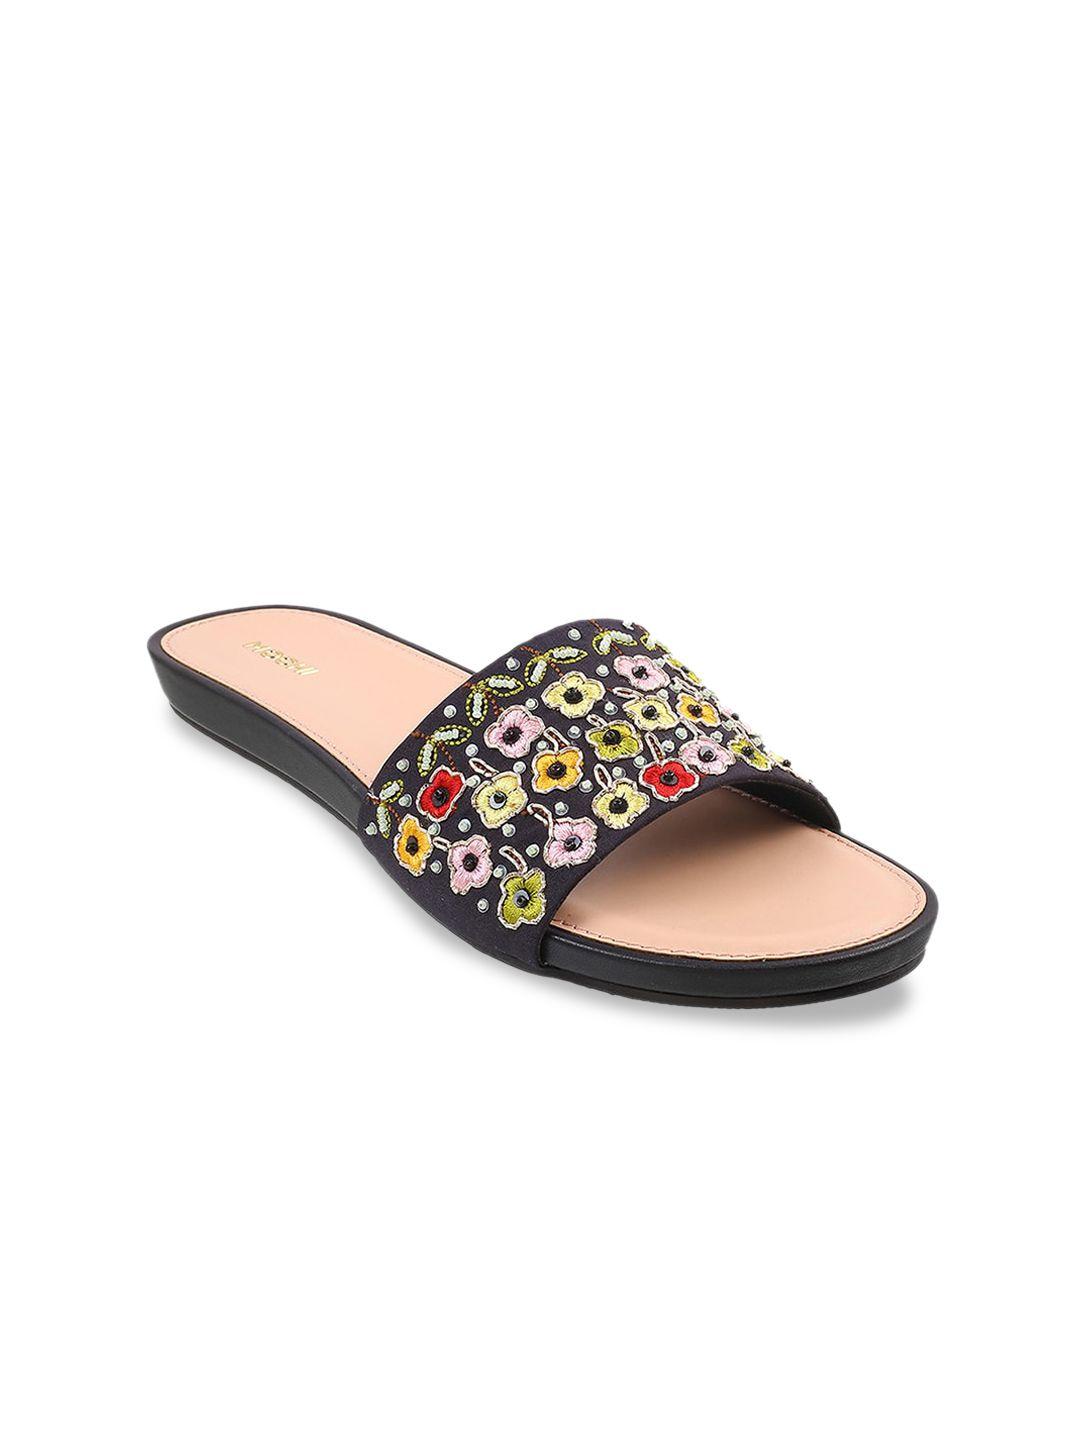 mochi embroidered open toe flats